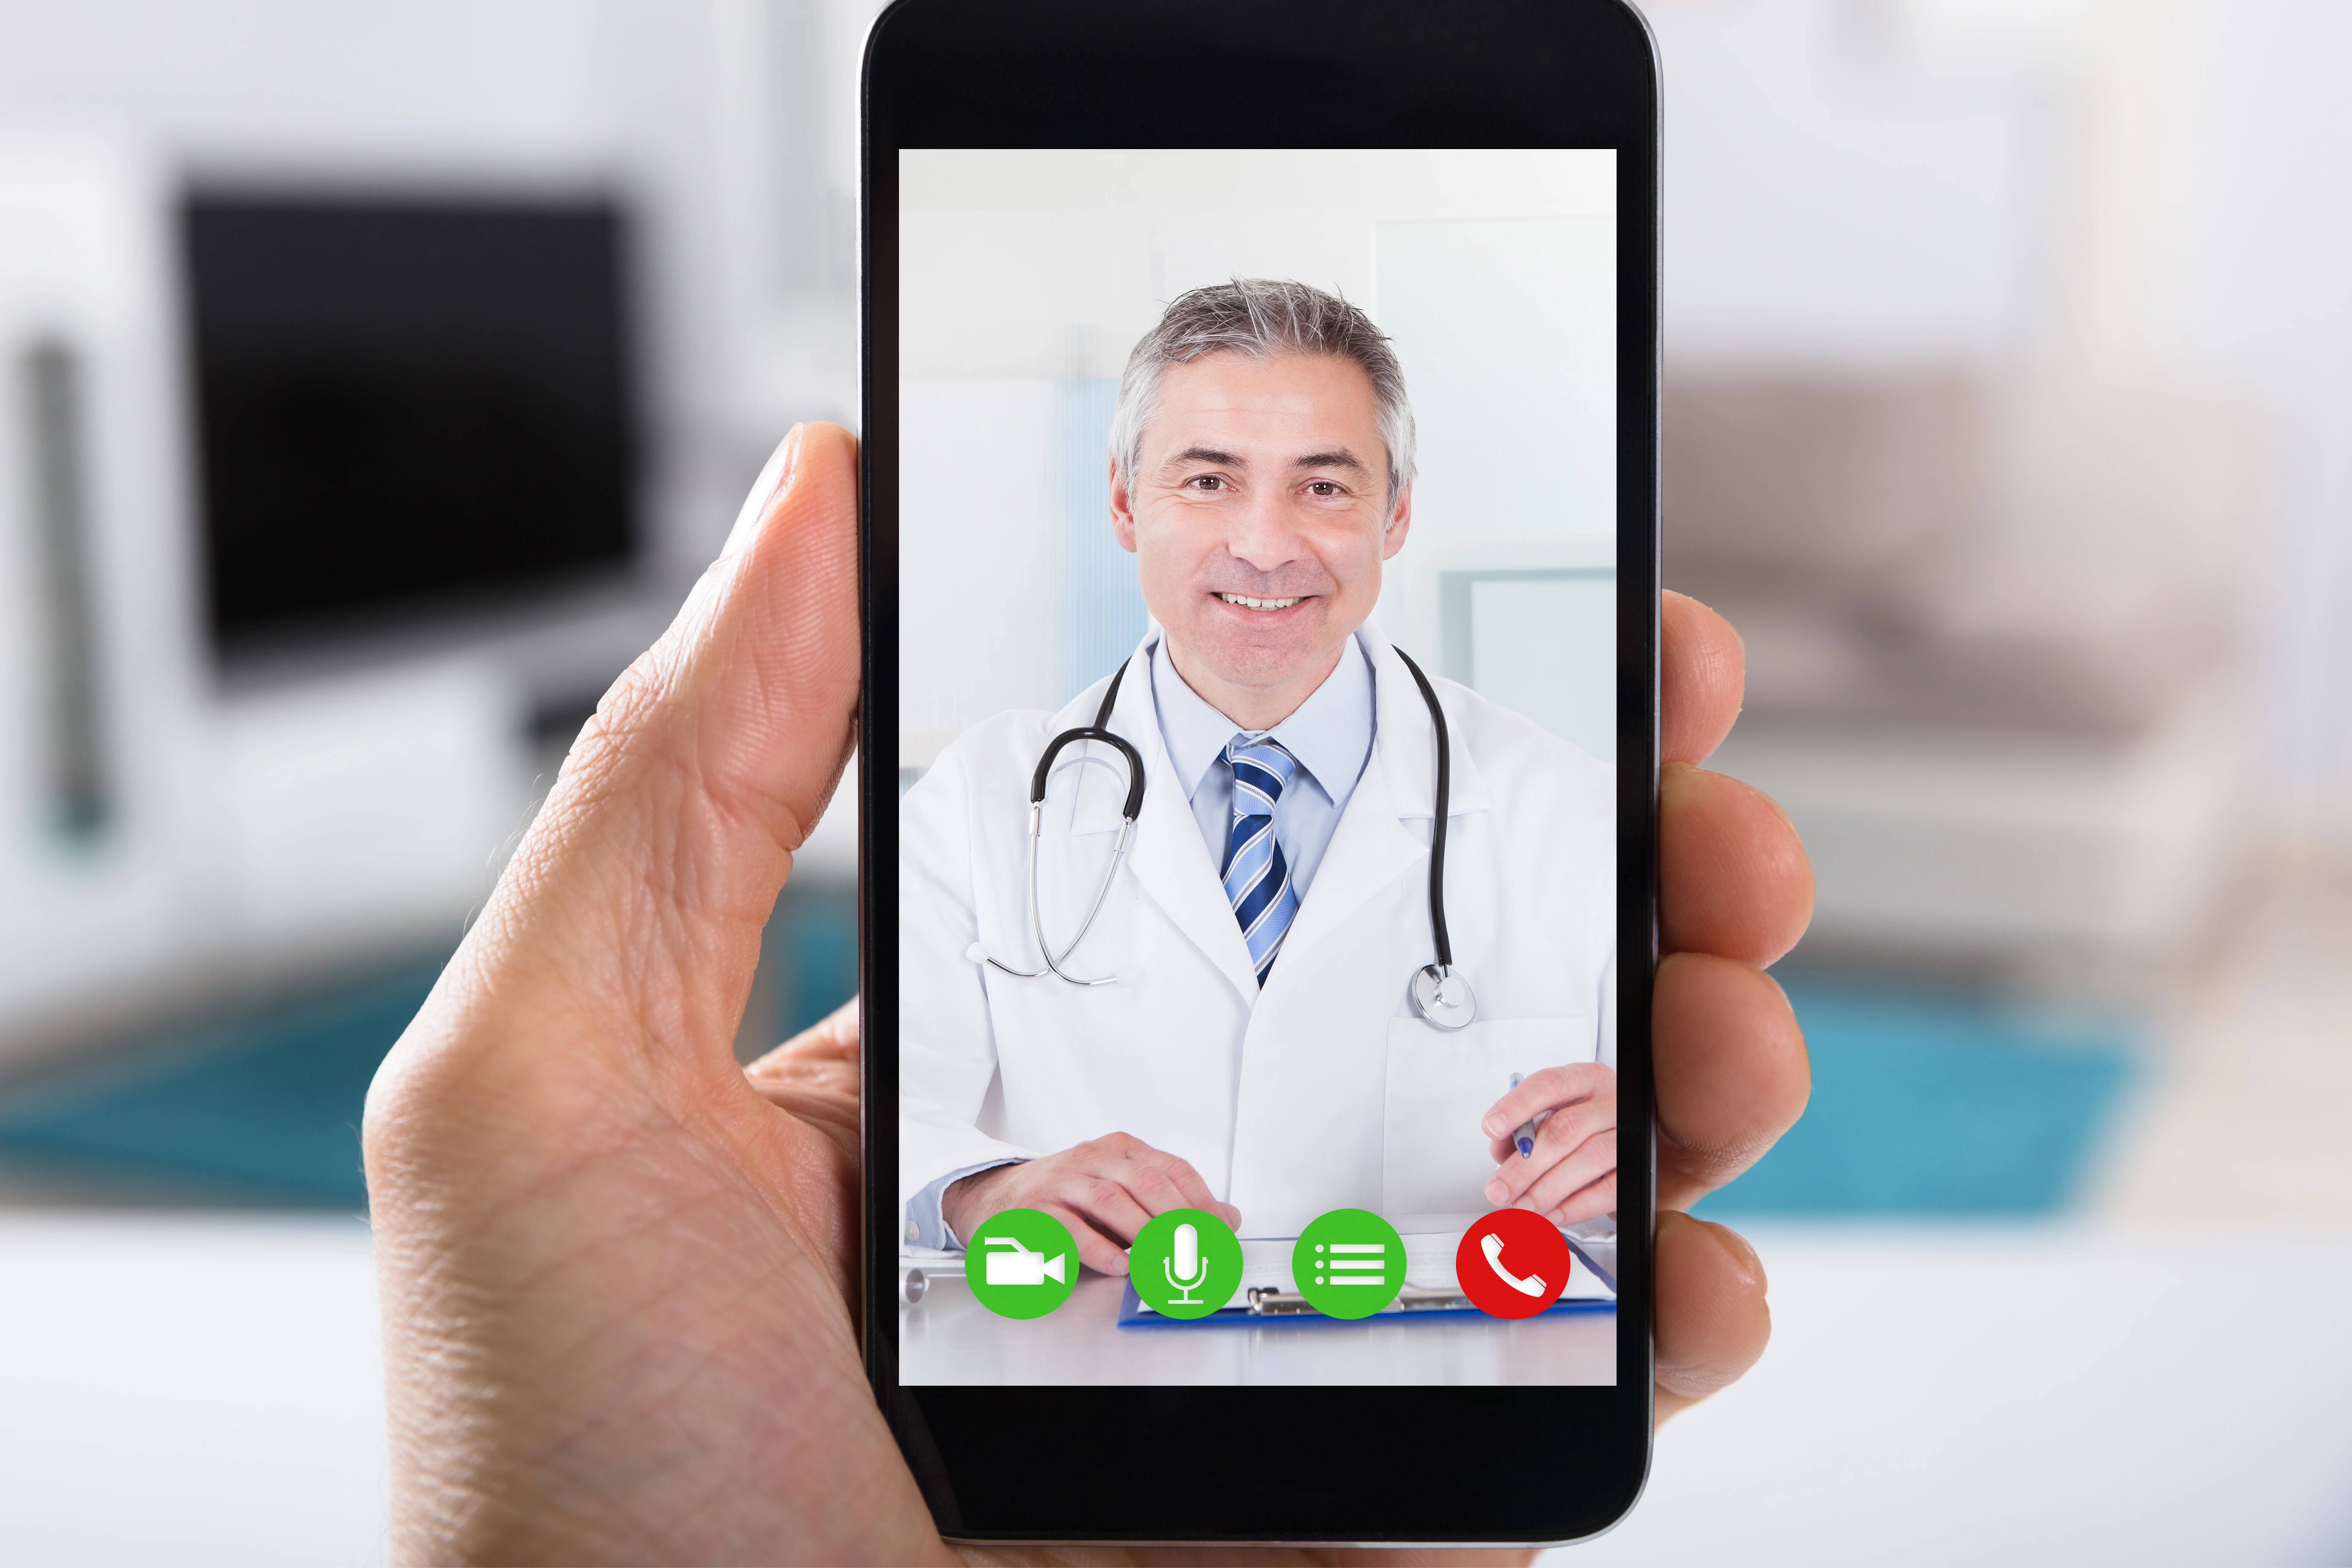 Here is how execs from Oscar Health, Intermountain and Cerner say the telehealth boom will change healthcare